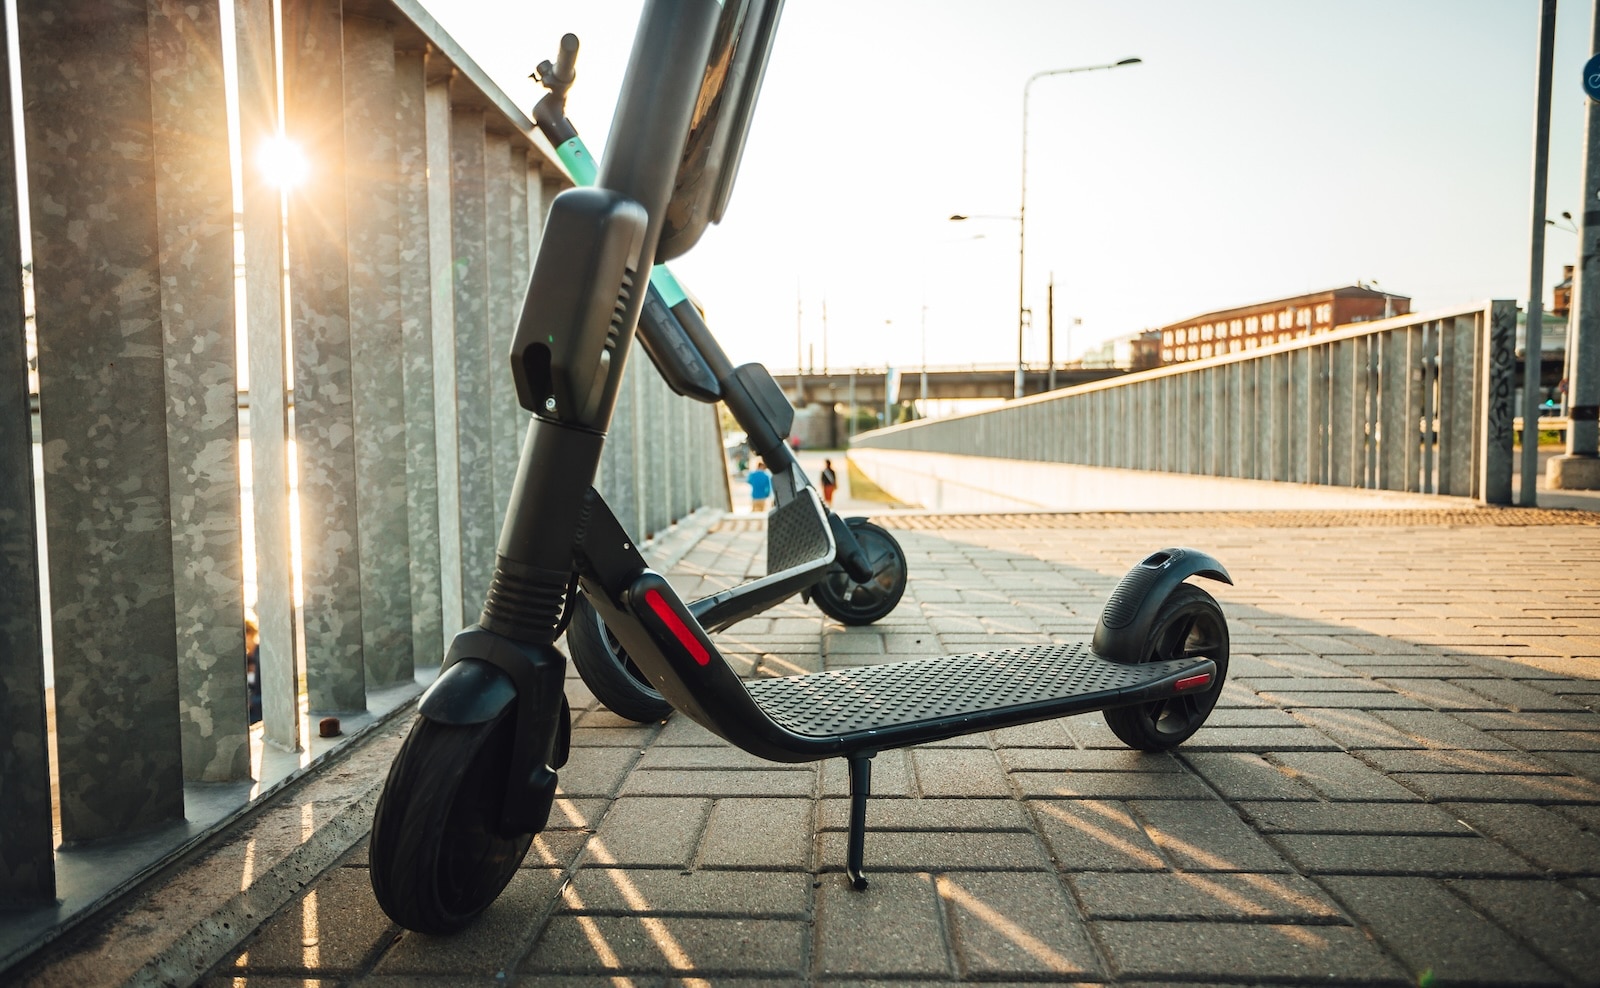 Micro-mobility efers to lightweight, often electric, transportation options for short-distance travel. Image showing electric scooters parked on a bridge.